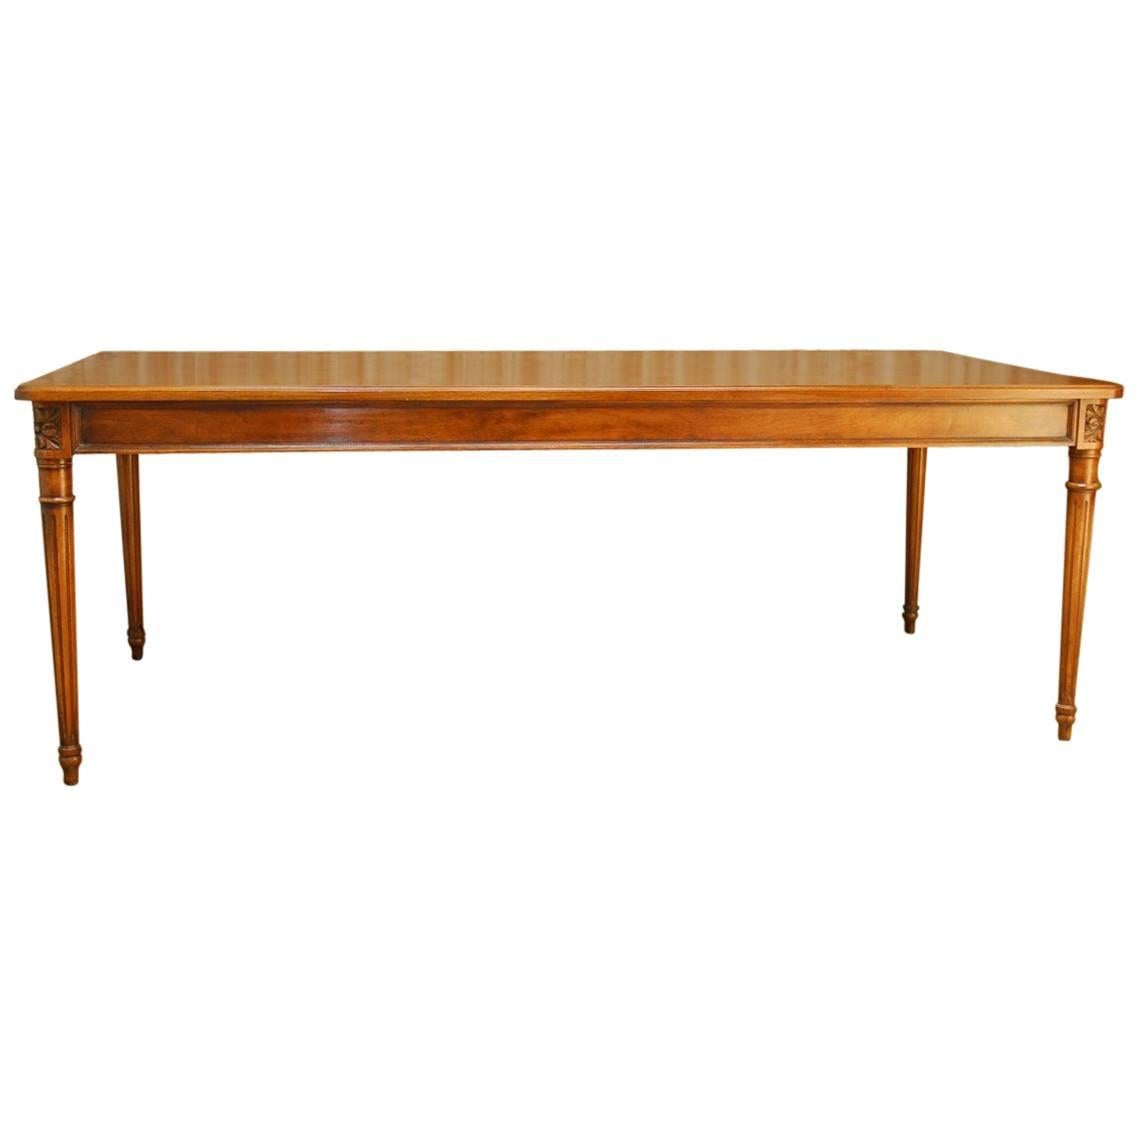 French Louis XVI Style Mahogany Dining Table with Leaves